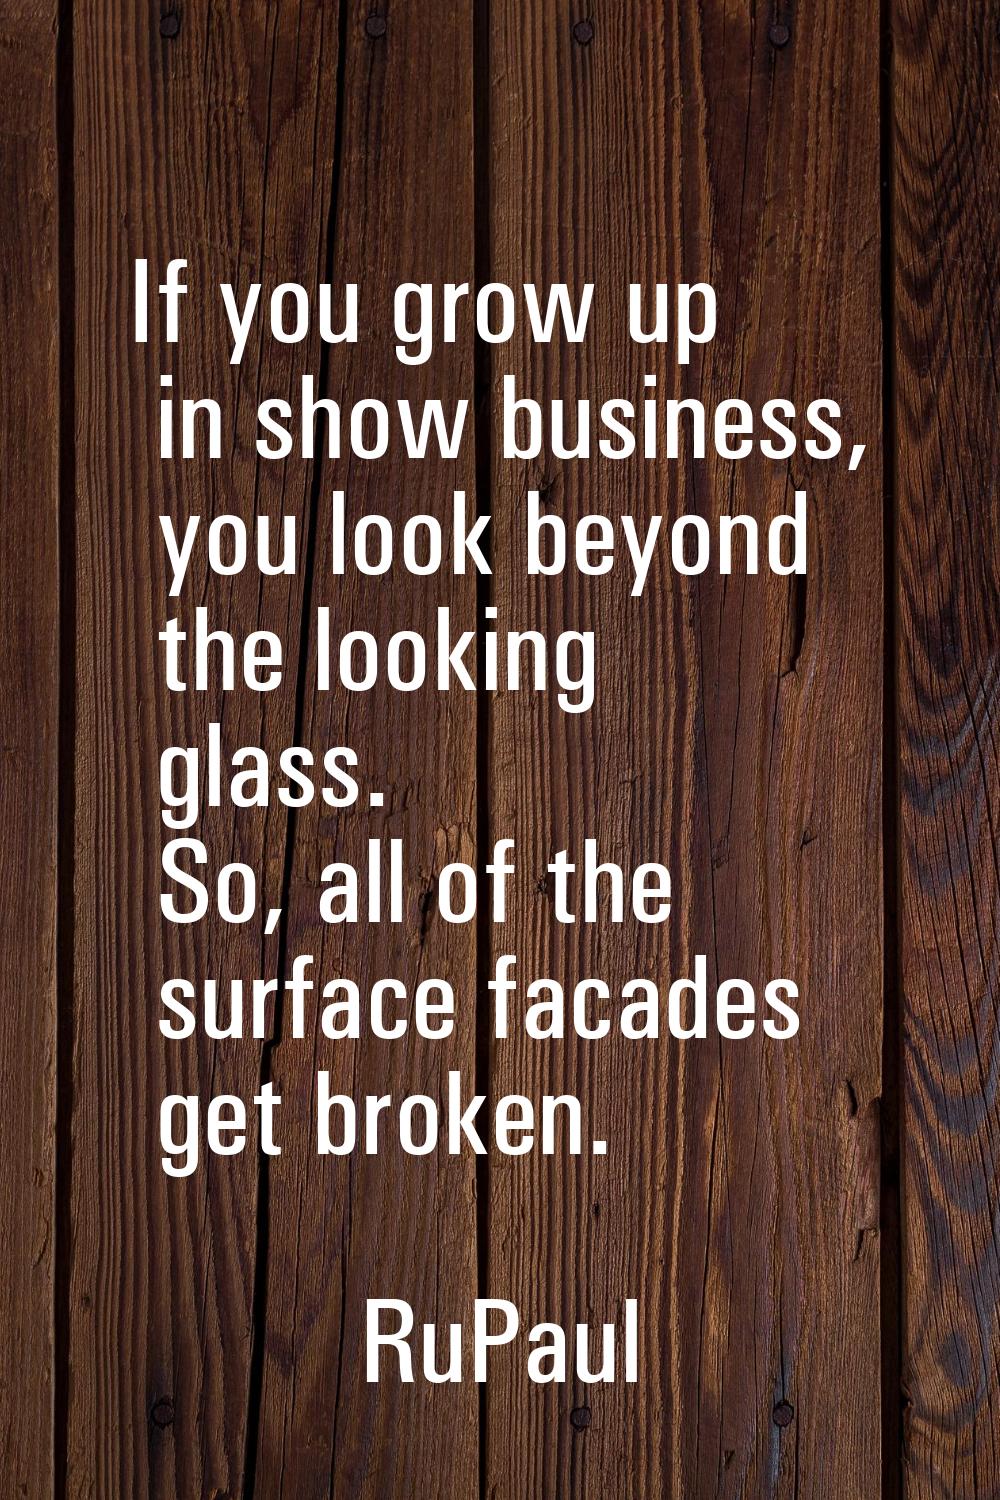 If you grow up in show business, you look beyond the looking glass. So, all of the surface facades 